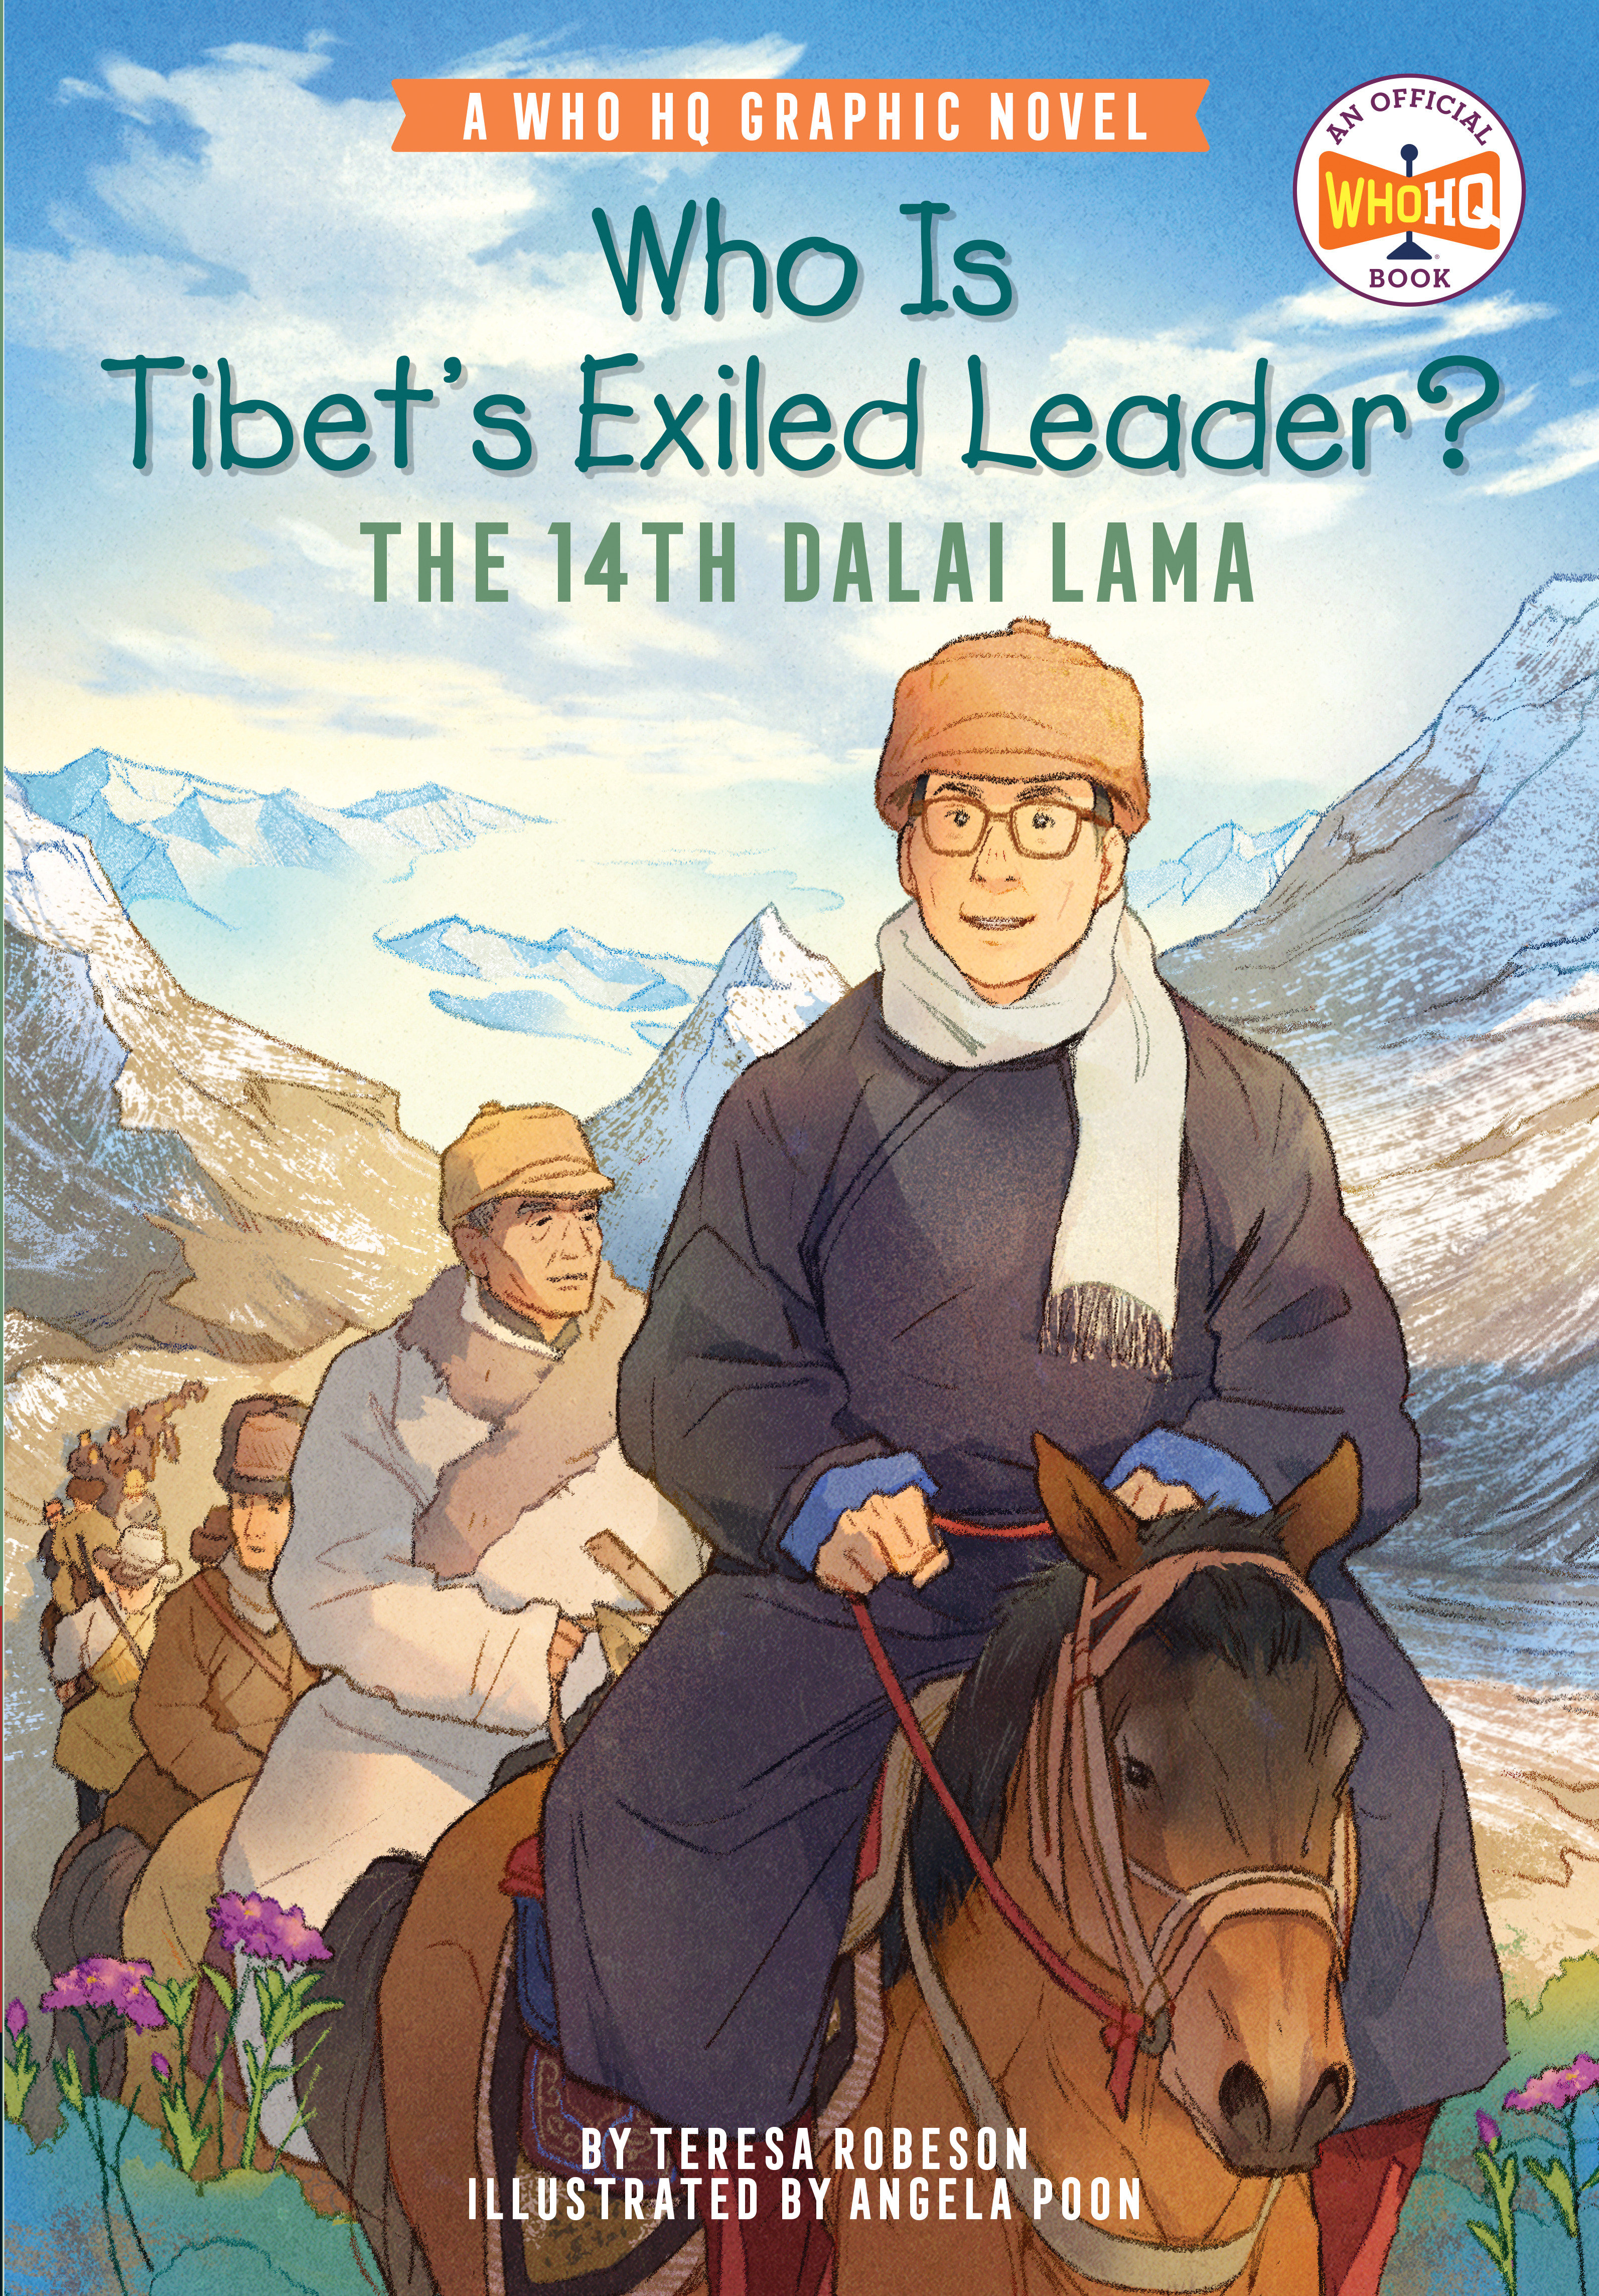 Who HQ Hardcover Volume 3 Who Is Tibet's Exiled Leader? The 14th Dalai Lama